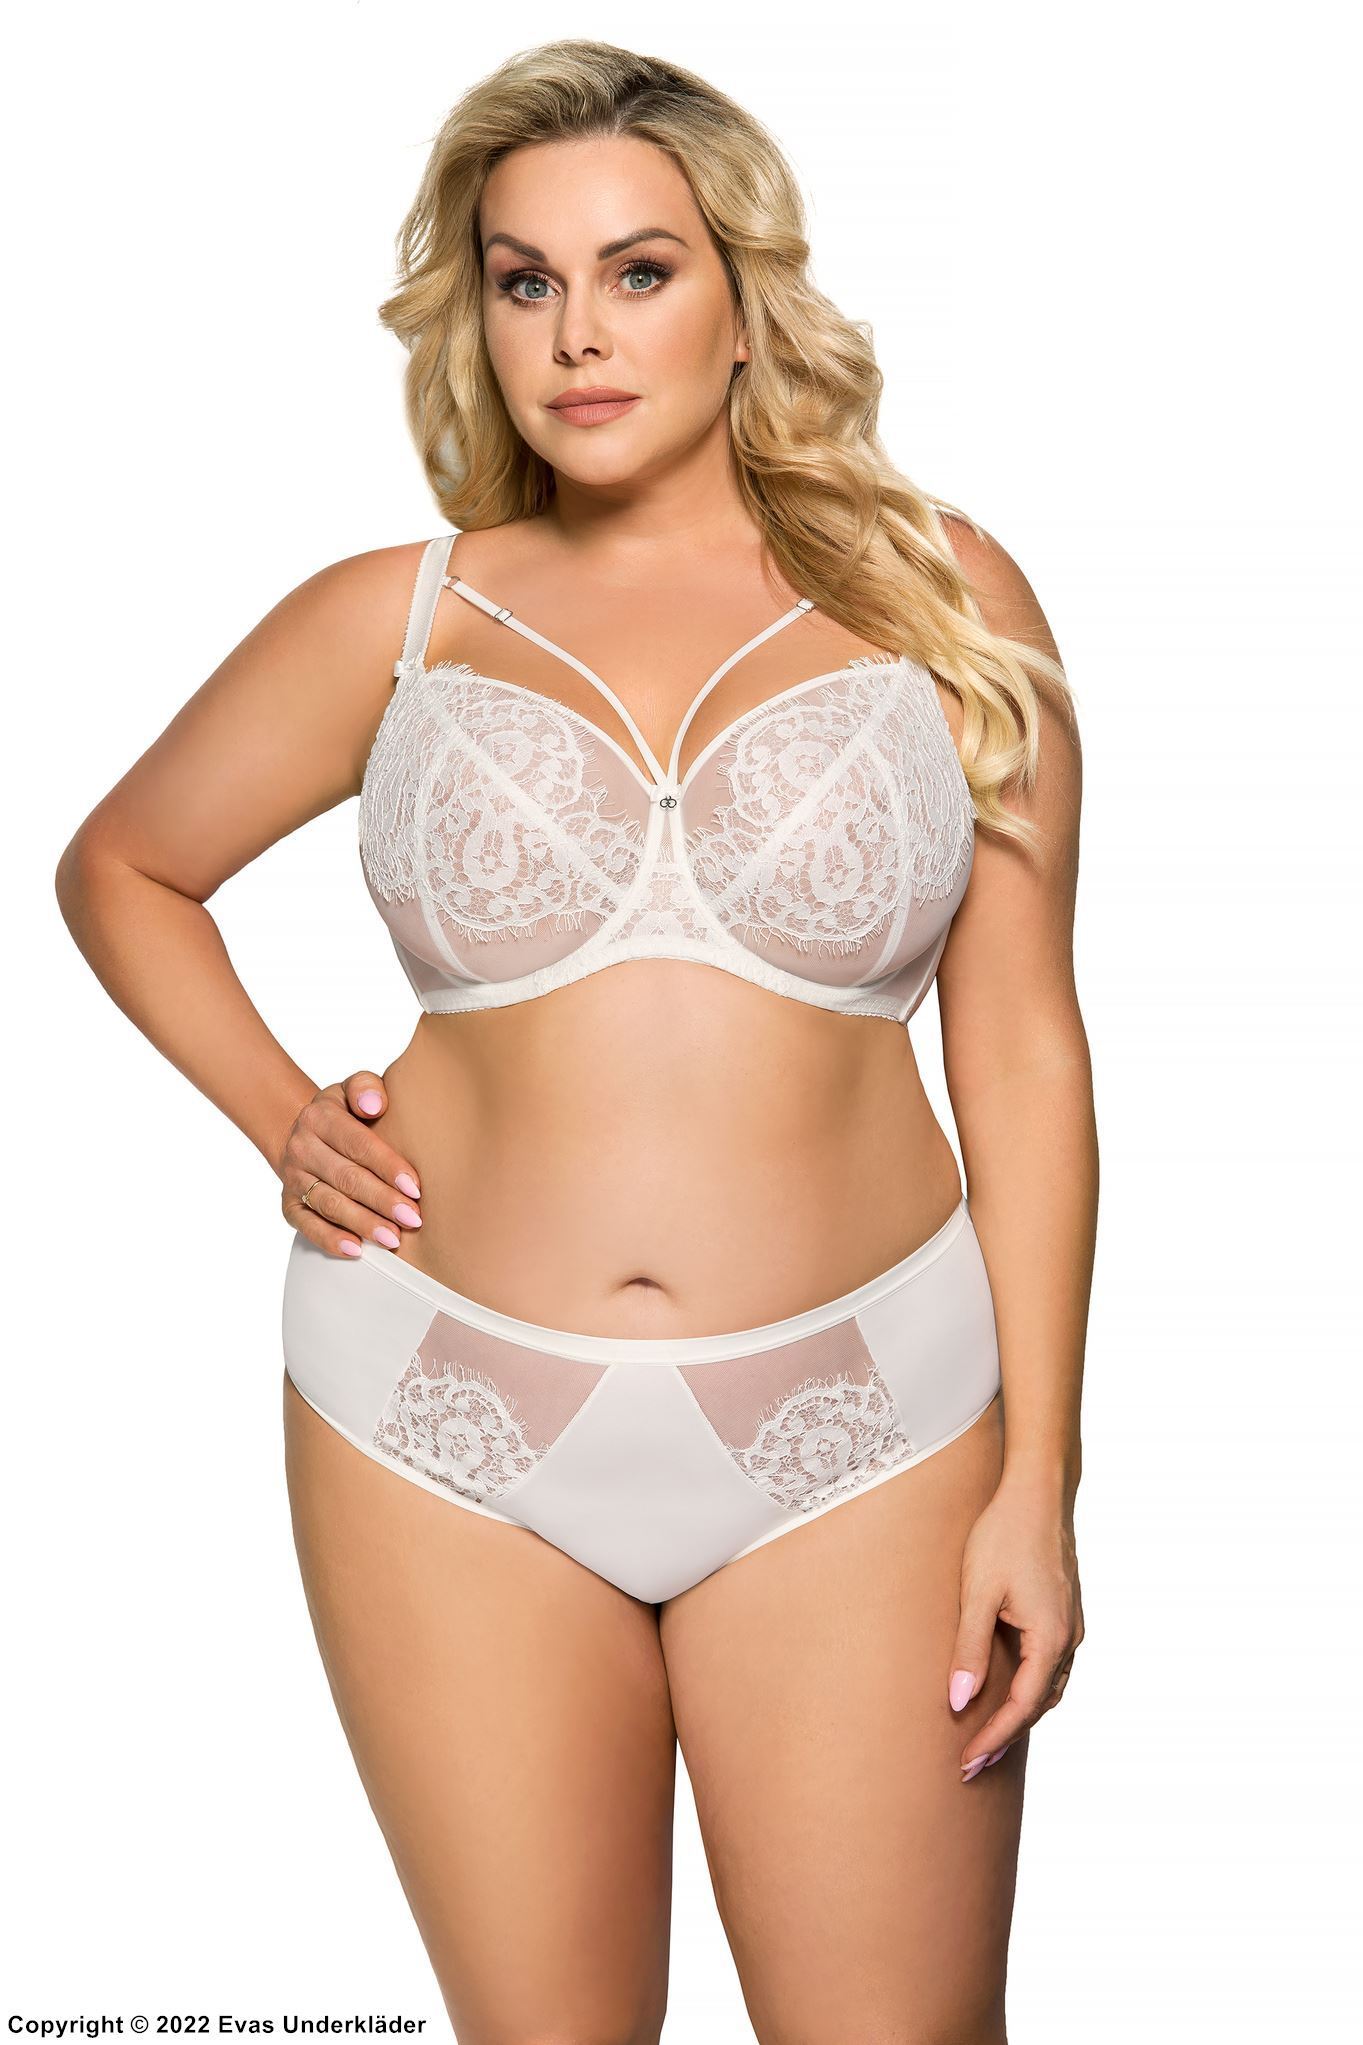 Soft cup bra, straps over bust, eyelash lace, sheer cups, D to M-cup